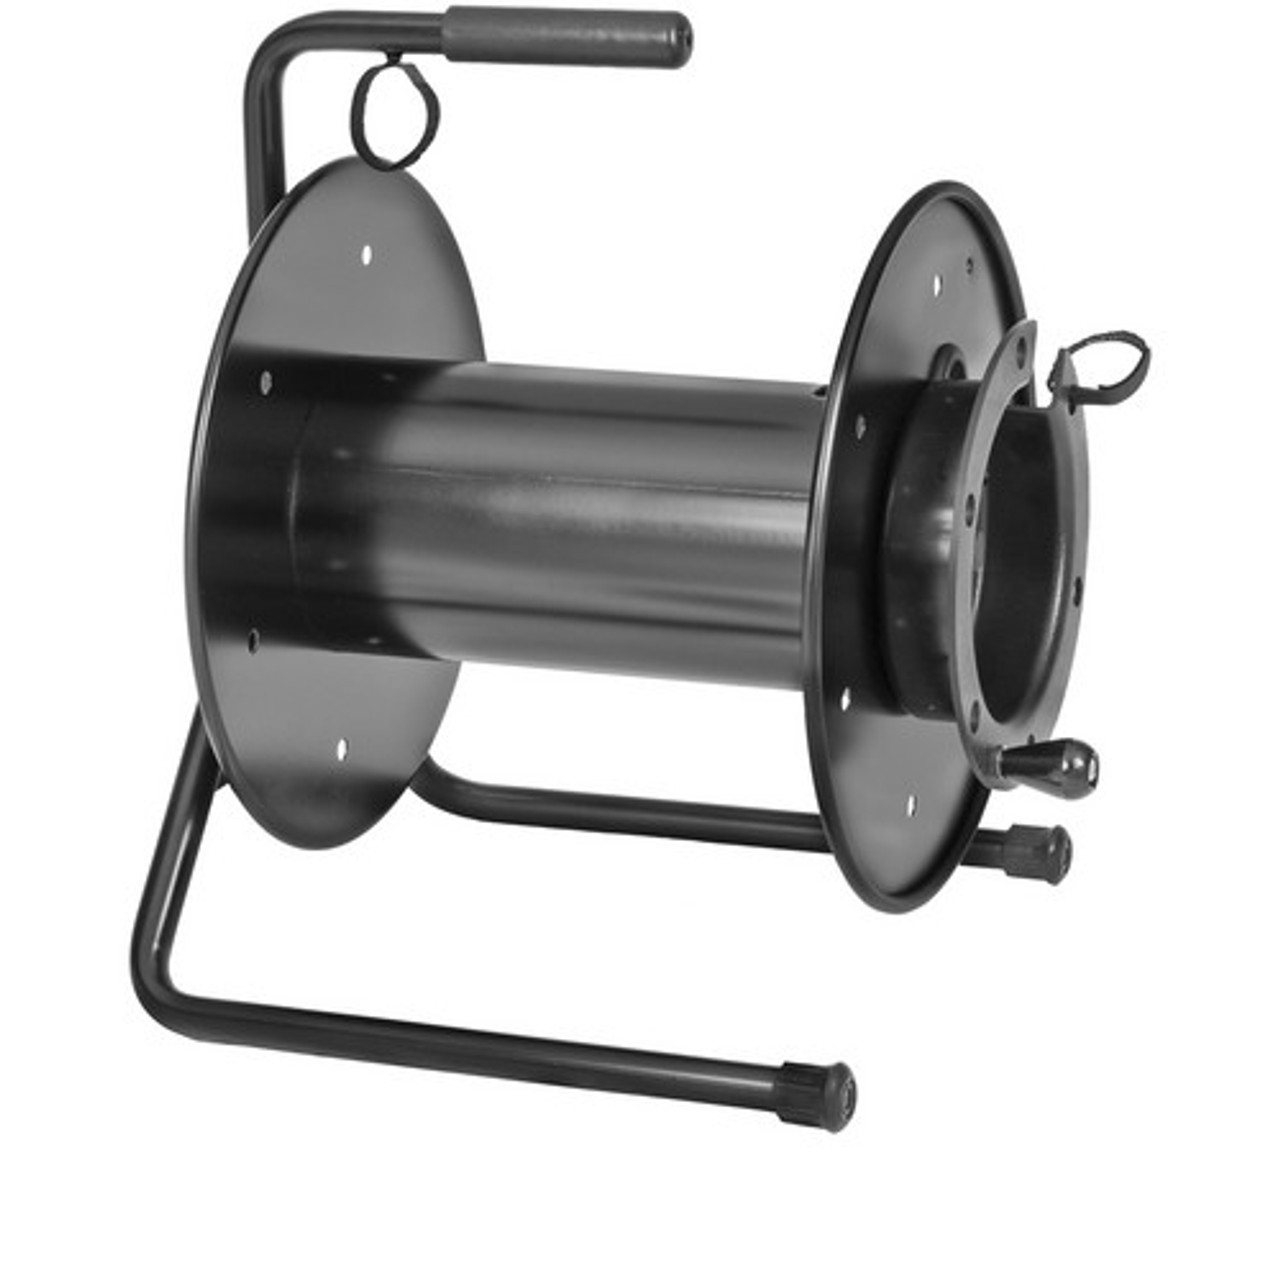 Hannay AVC20-14-16-DE Portable Cable Storage Reel with Drum Extension